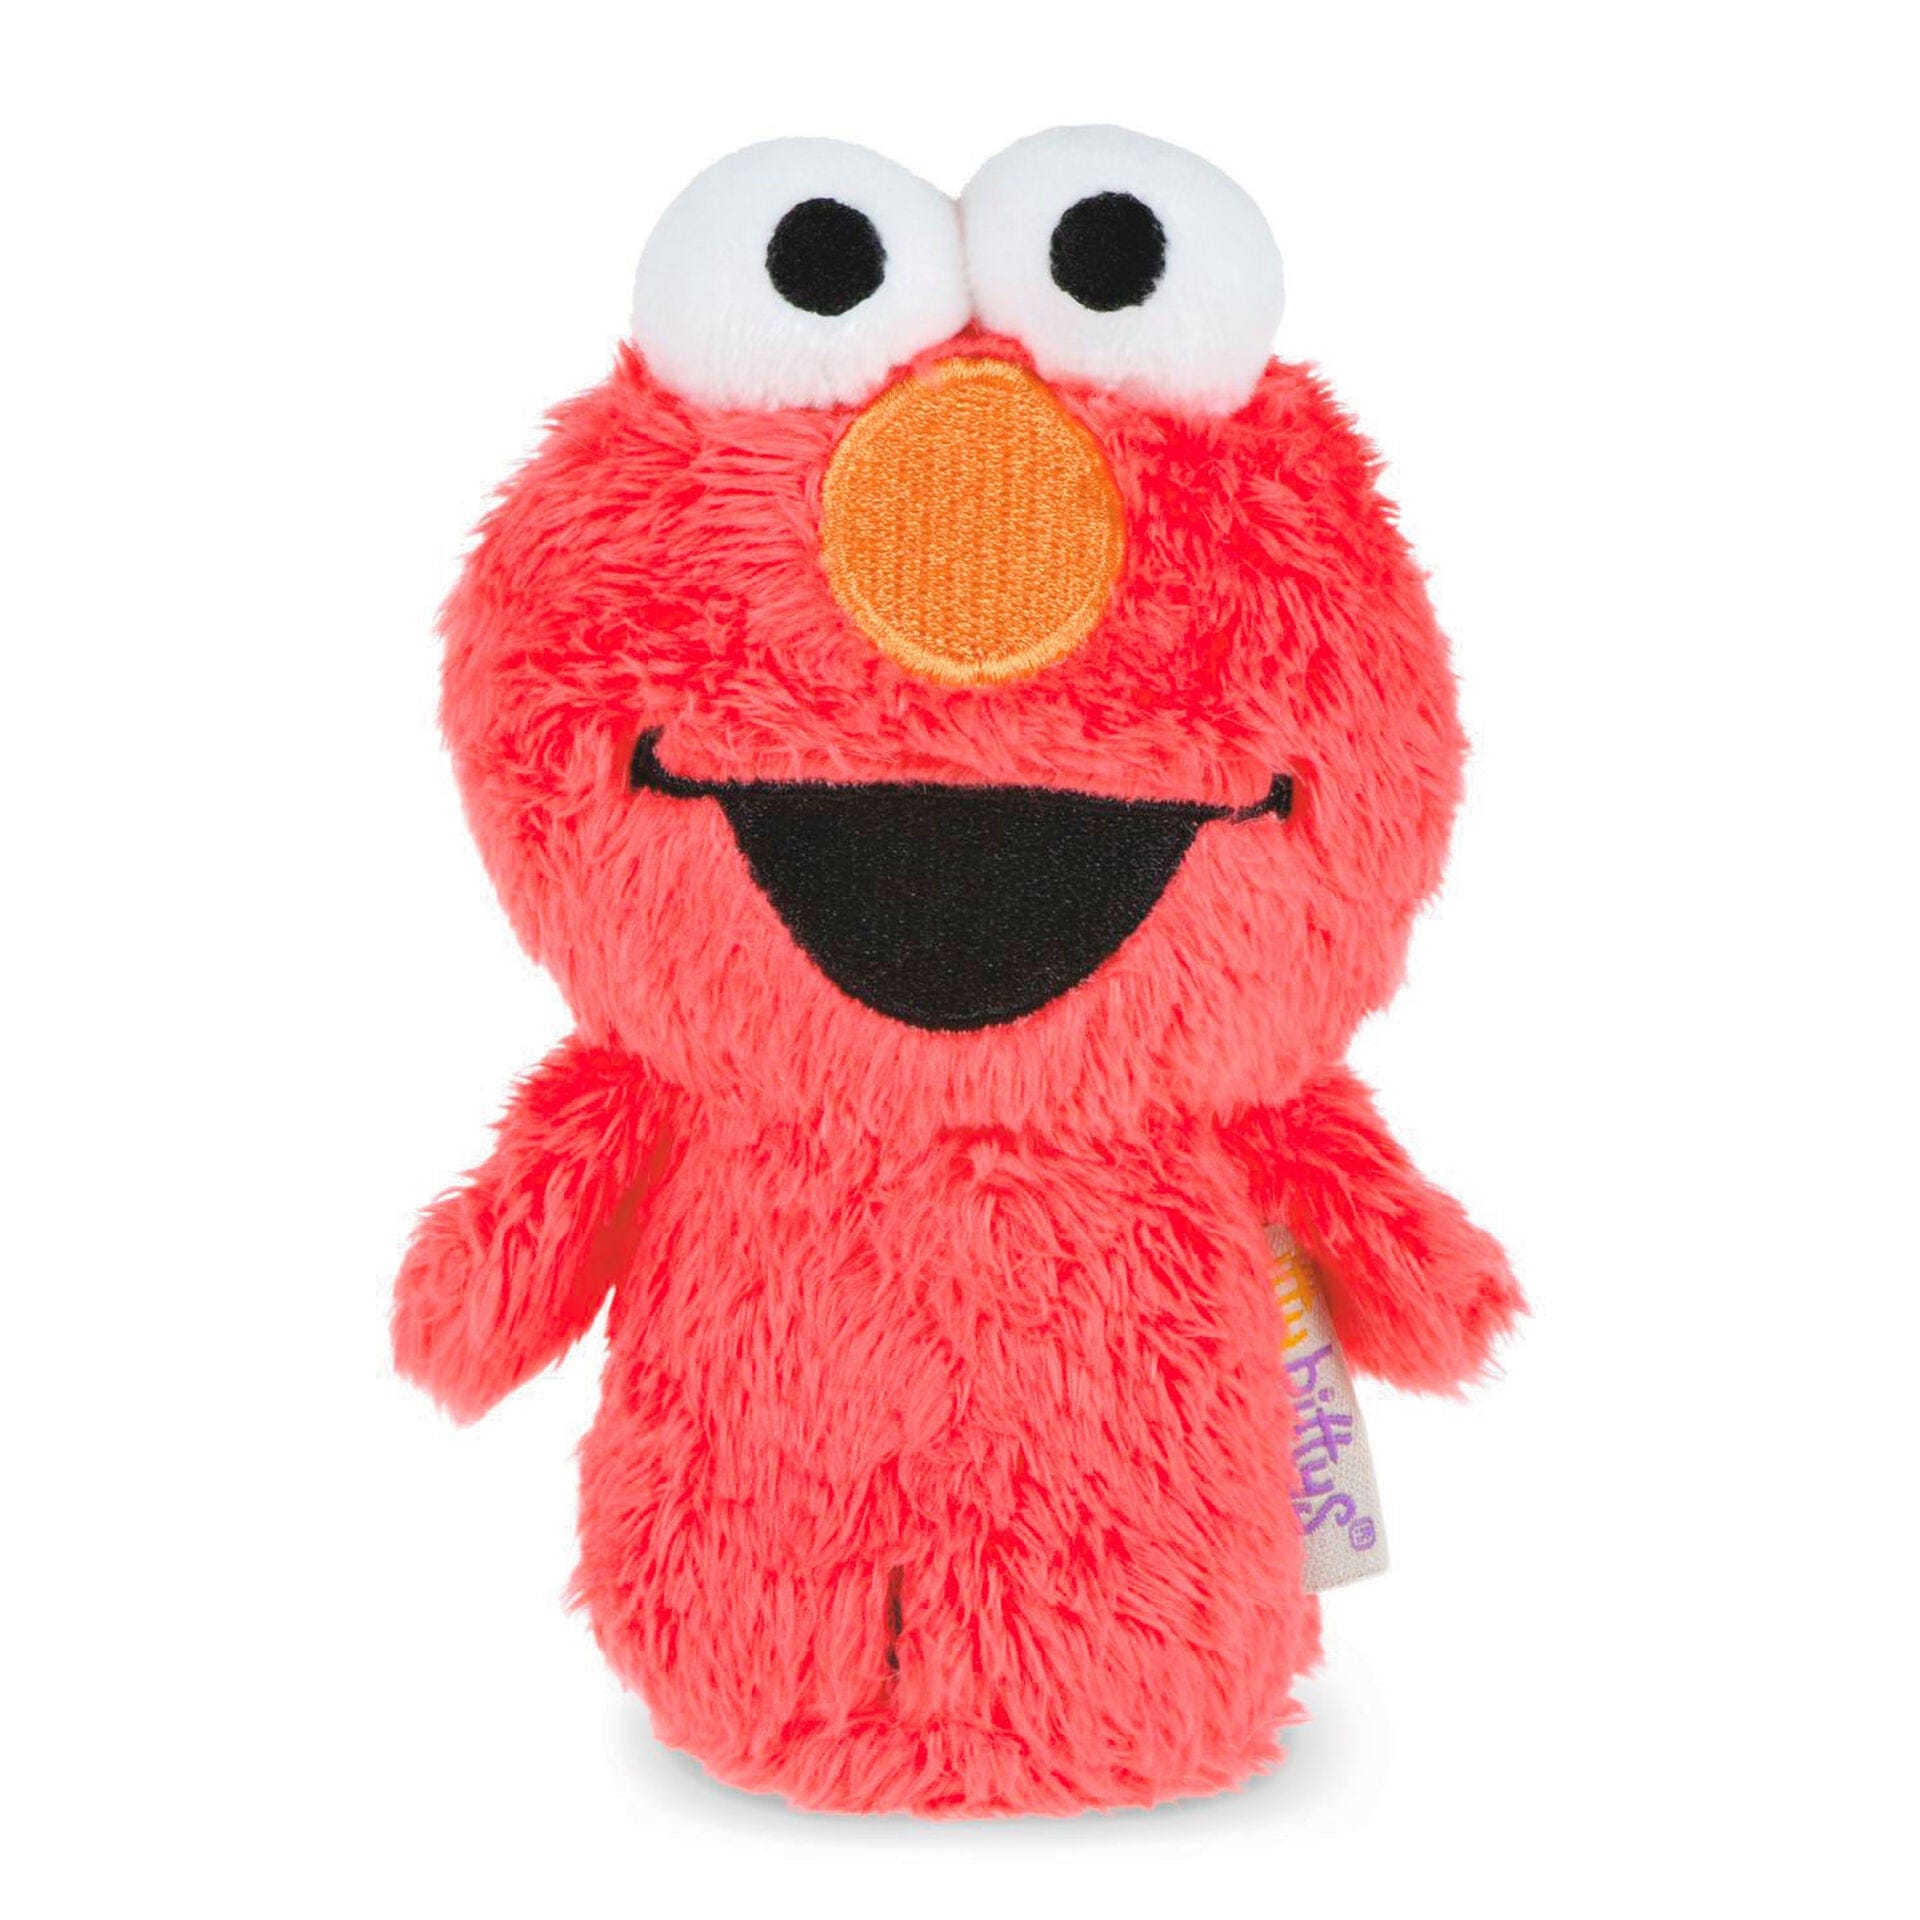 cute baby elmo pictures